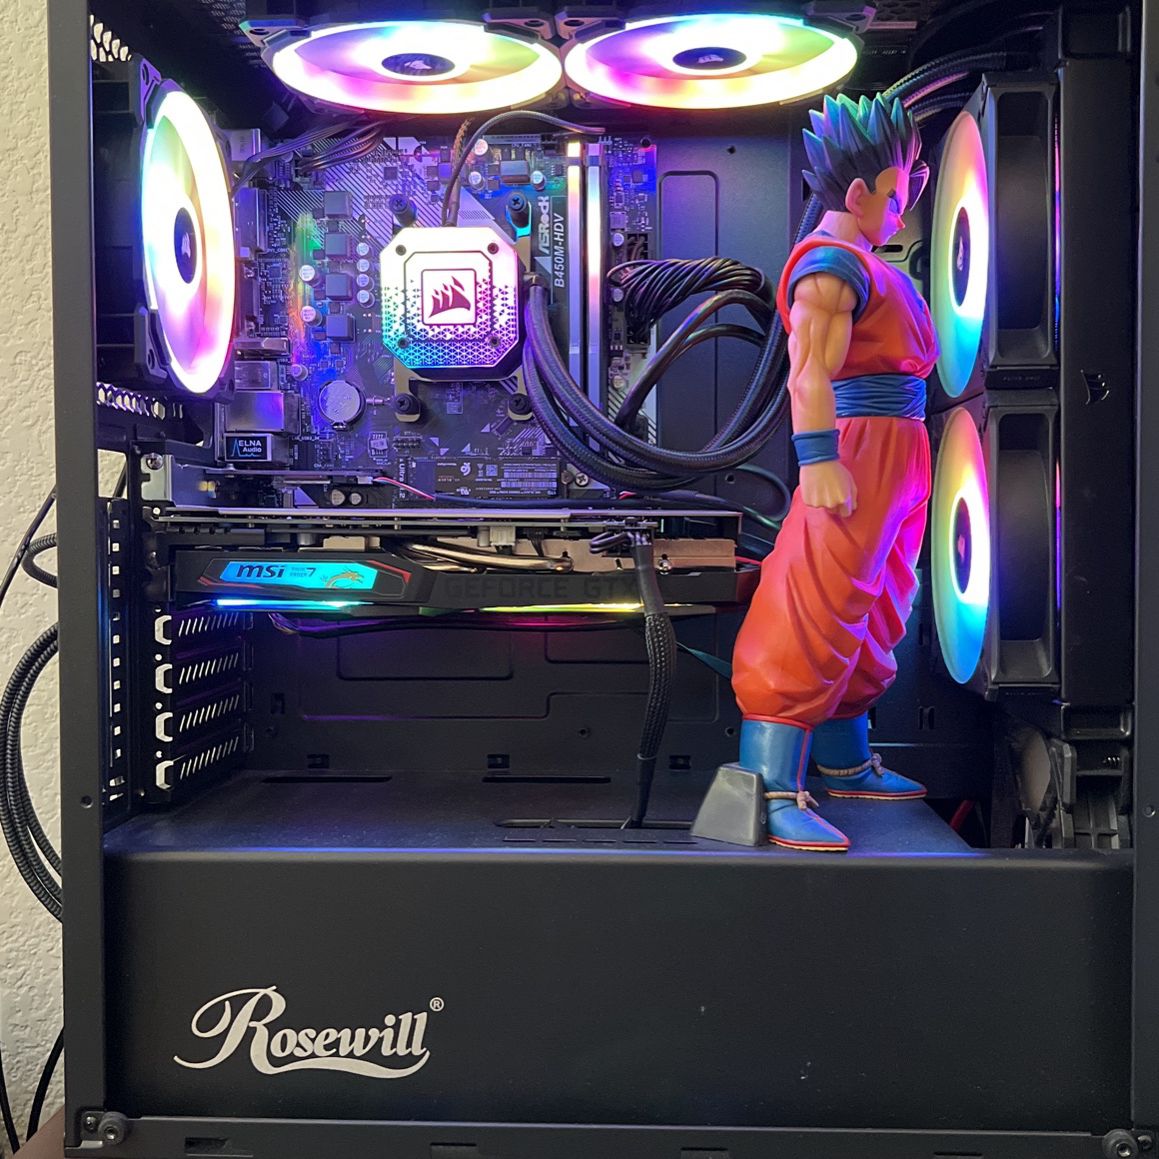 MUST SELL - Complete Gaming PC setup - Ryzen 7 5800X - M.2 - AIO - Matching RGB Fans